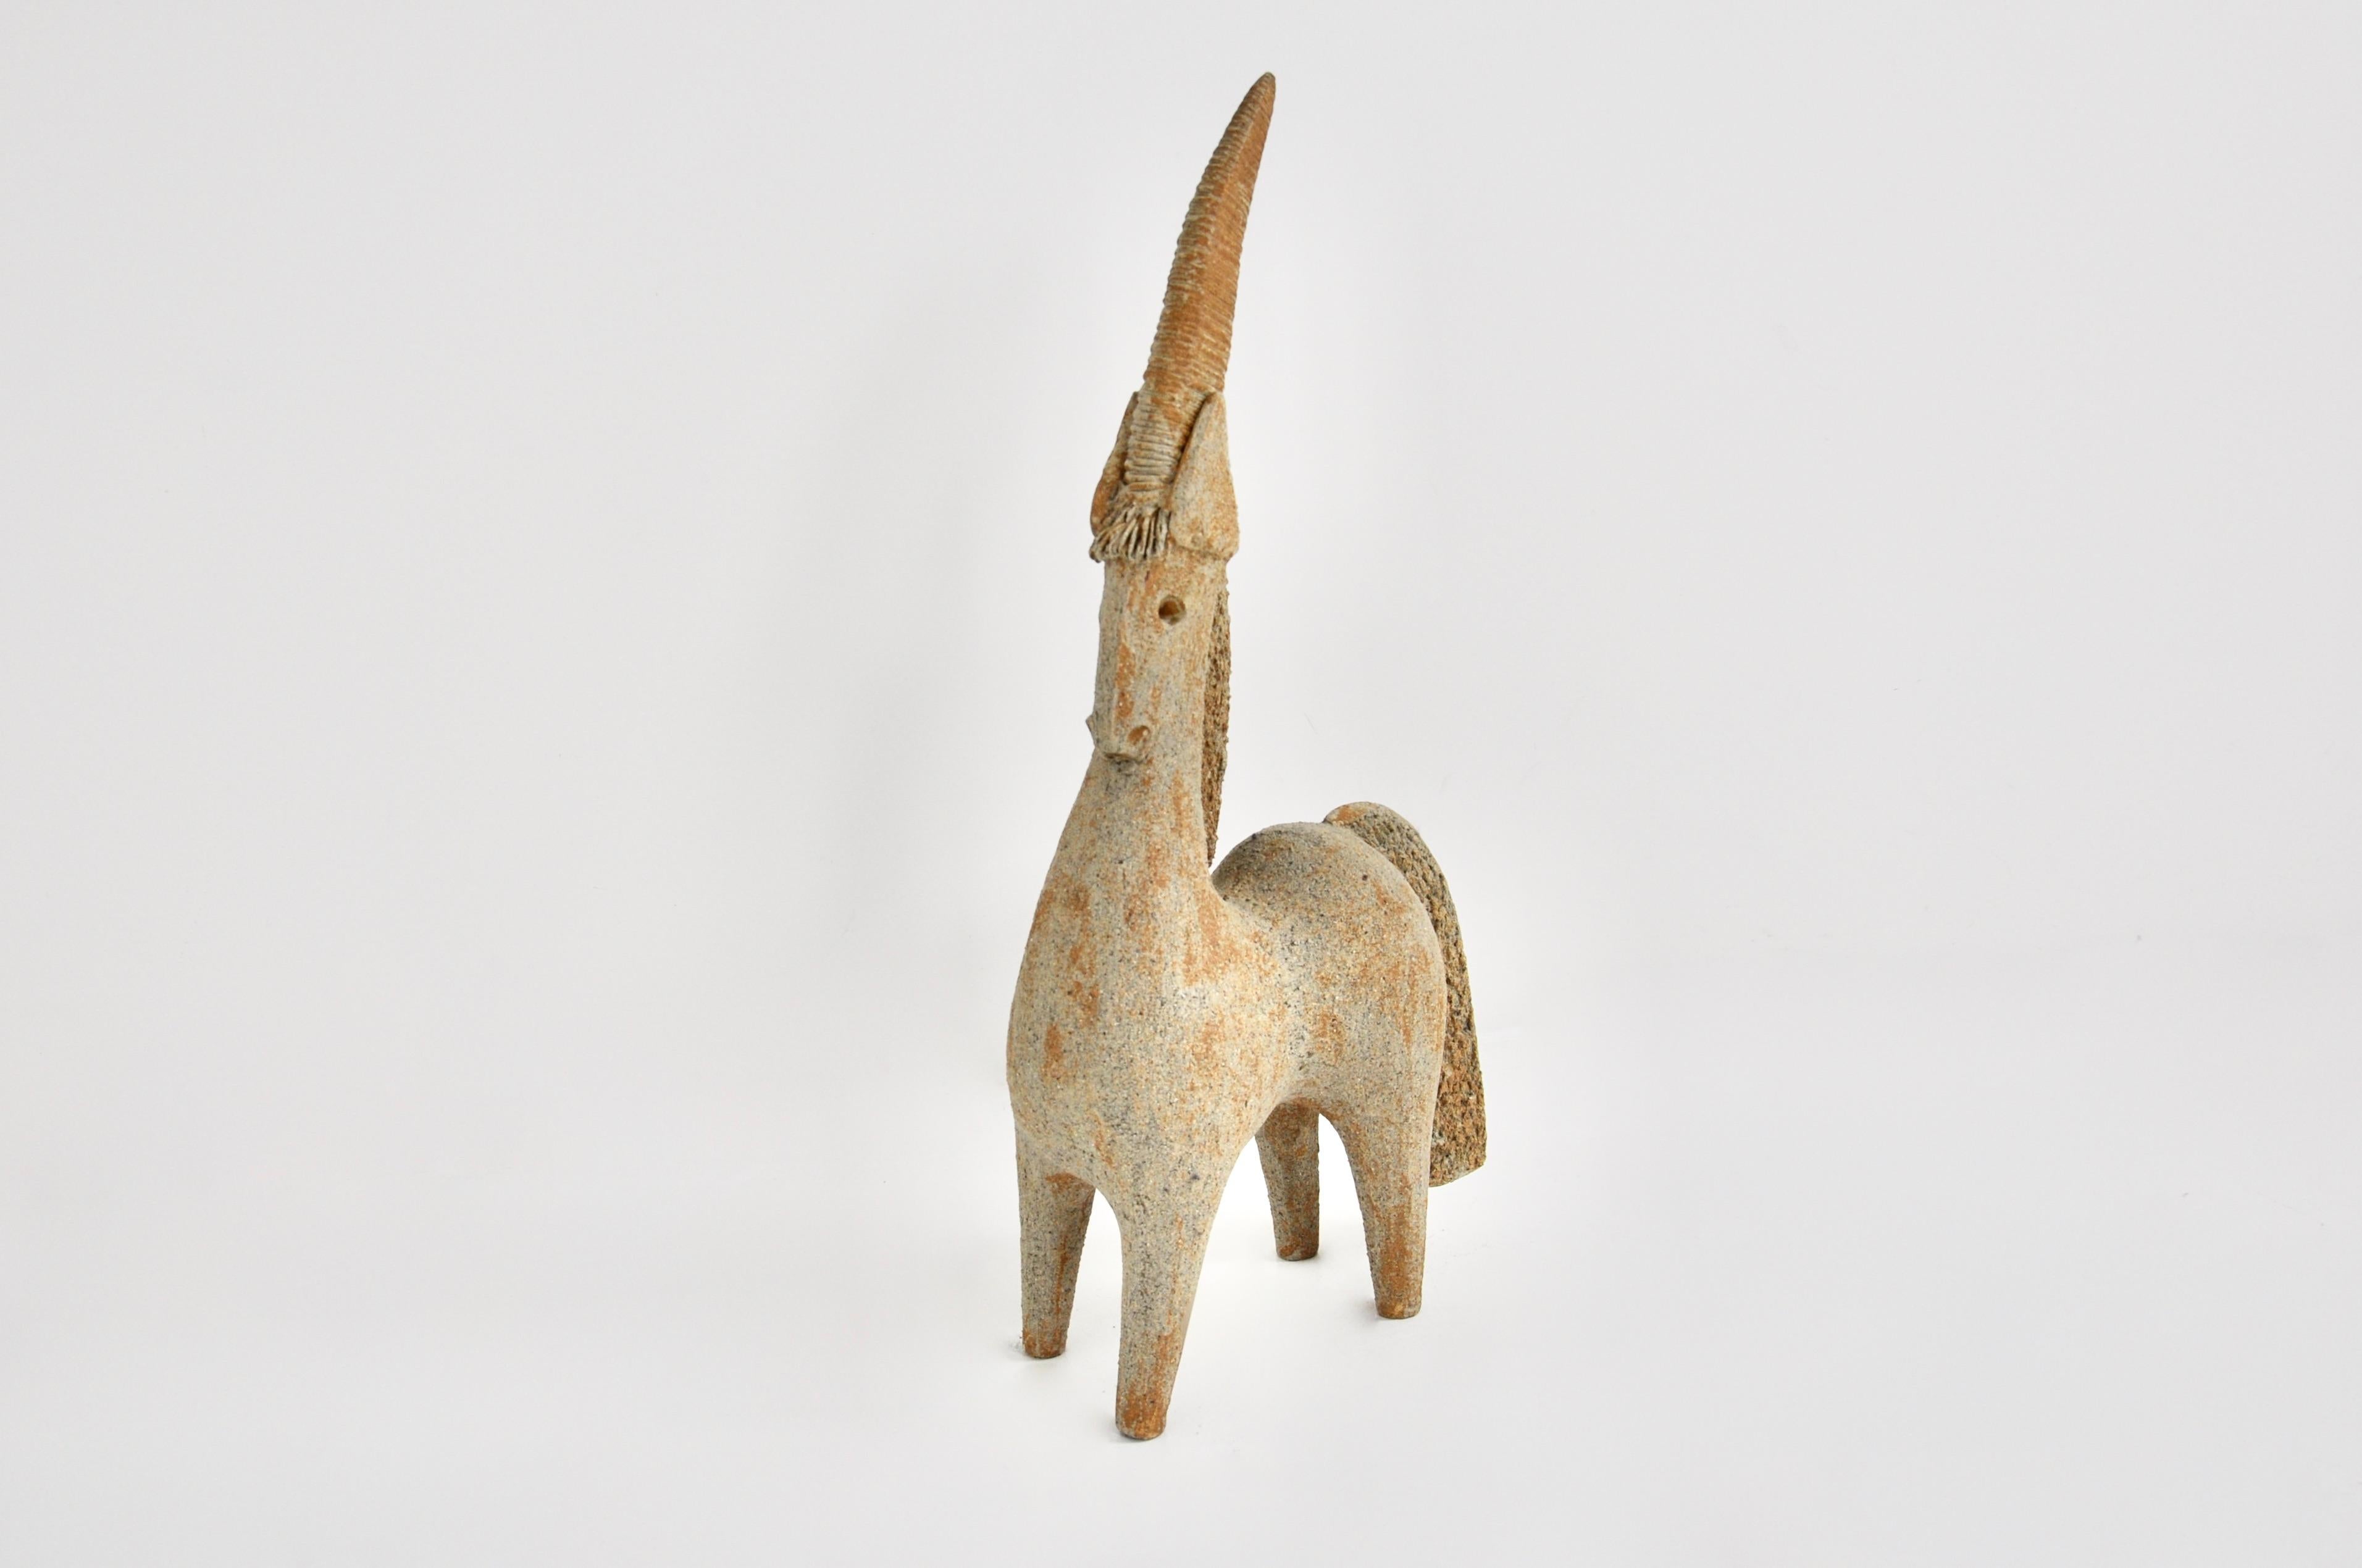 Ceramic in the shape of a unicorn designed by Dominique Pouchain. Stamped.